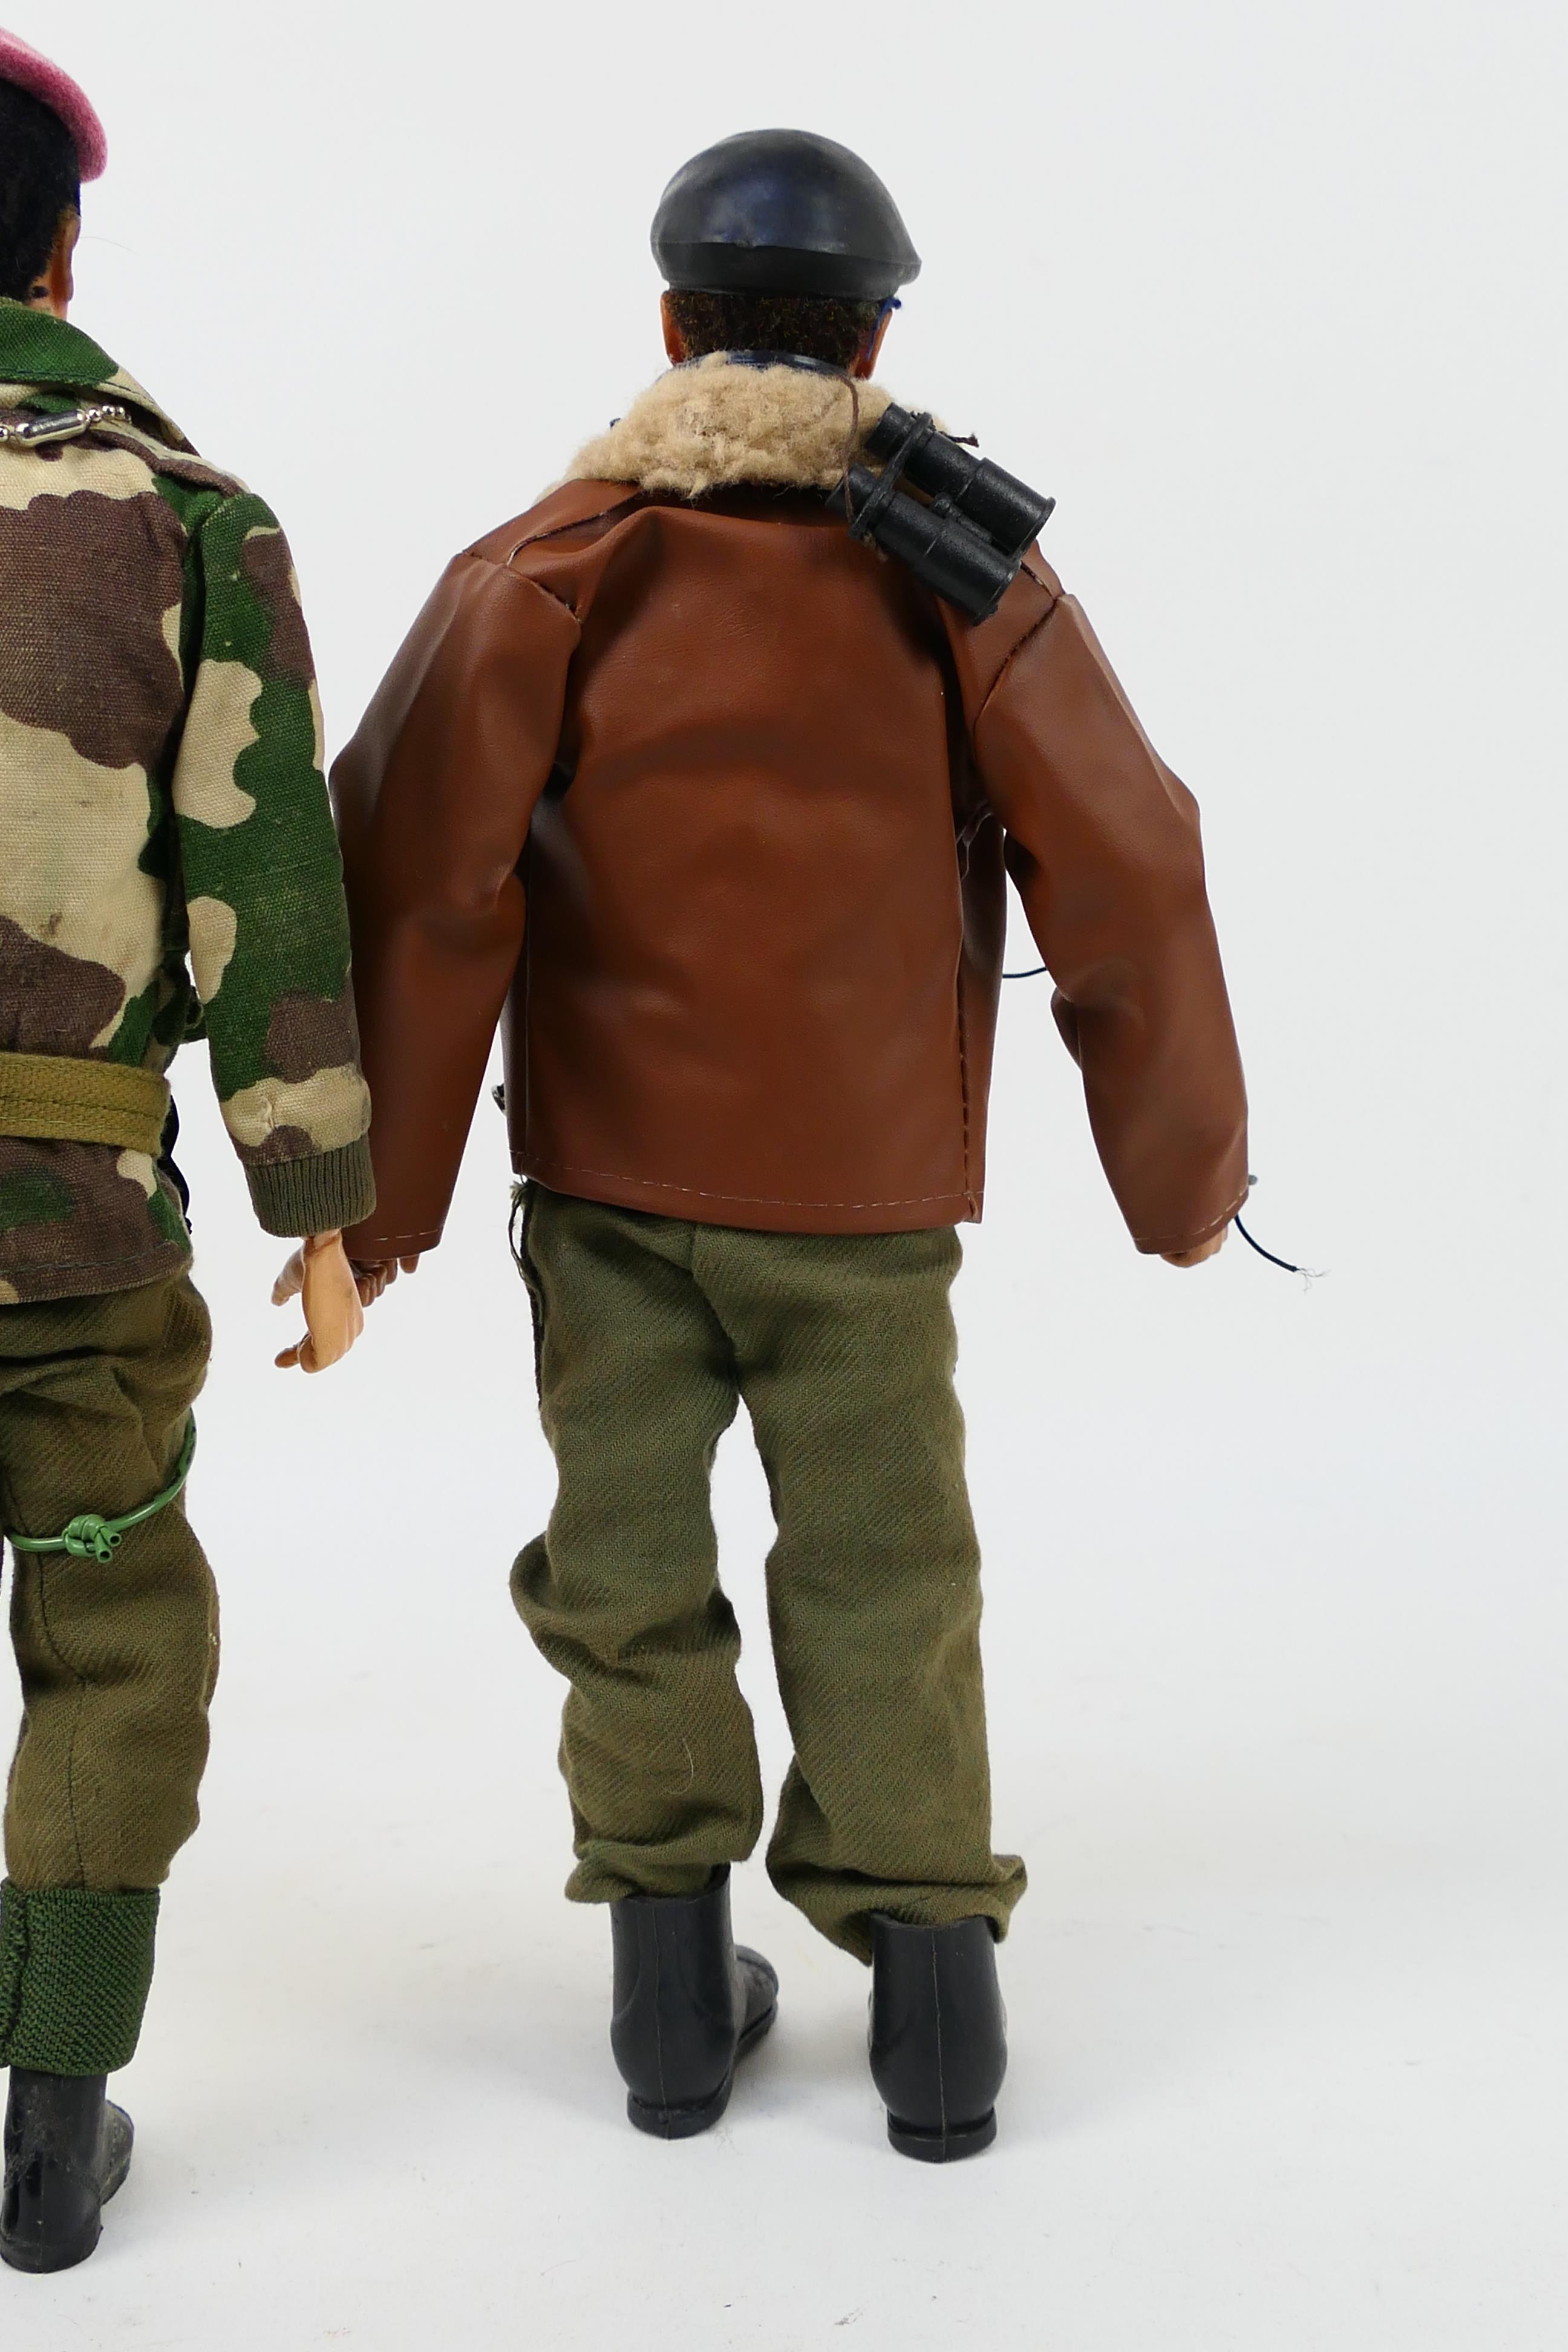 Palitoy - Action Man - Two unboxed vintage Action Man figures in Tank Commander and Parachute - Image 8 of 8